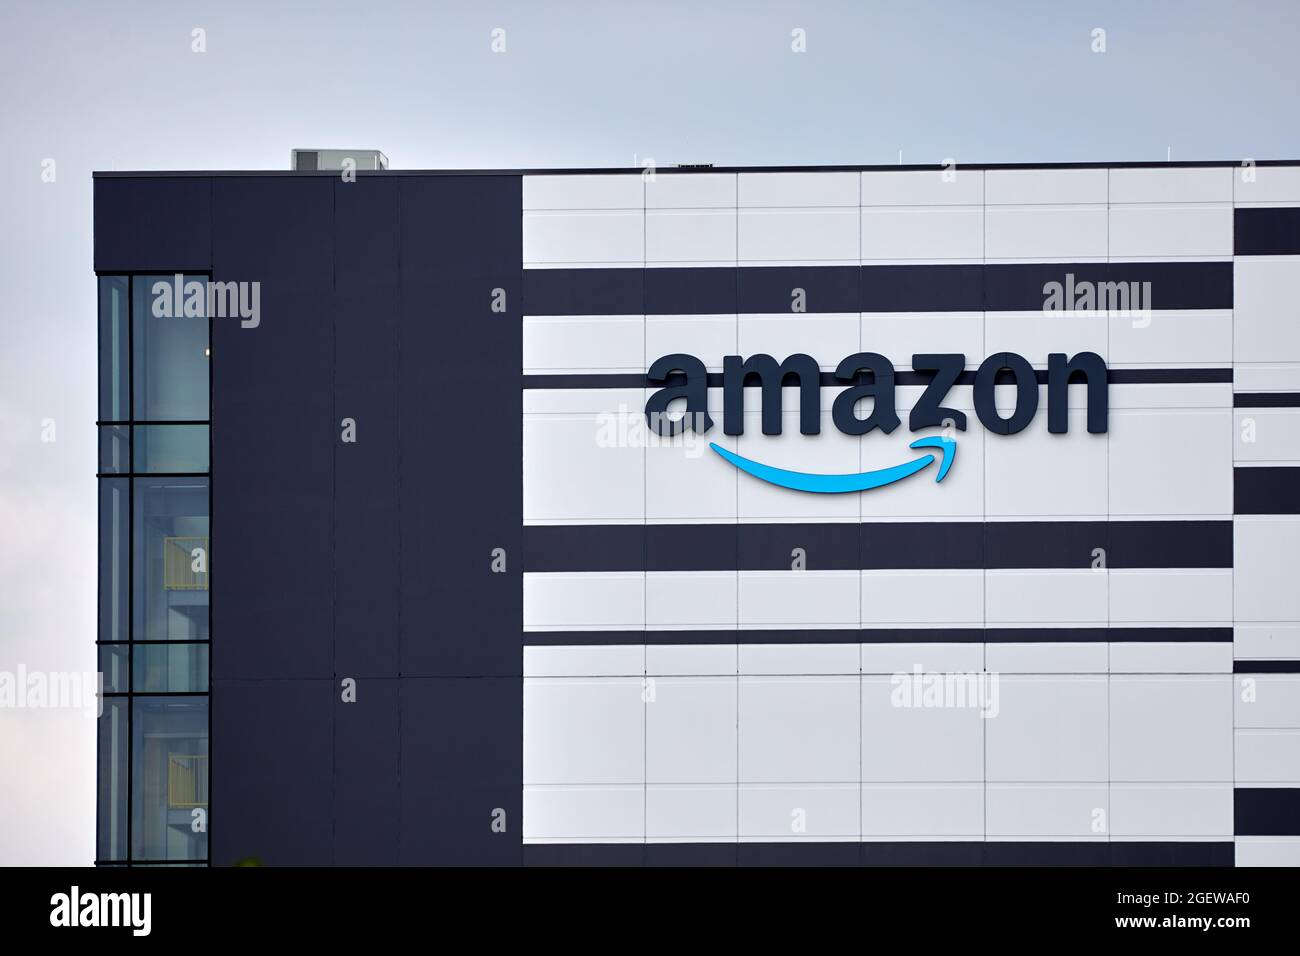 Ottawa, Ontario, Canada - August 13, 2021: The Amazon (NASDAQ: AMZN) logo on the side of a new warehouse and distribution center at 222 Citigate Drive Stock Photo